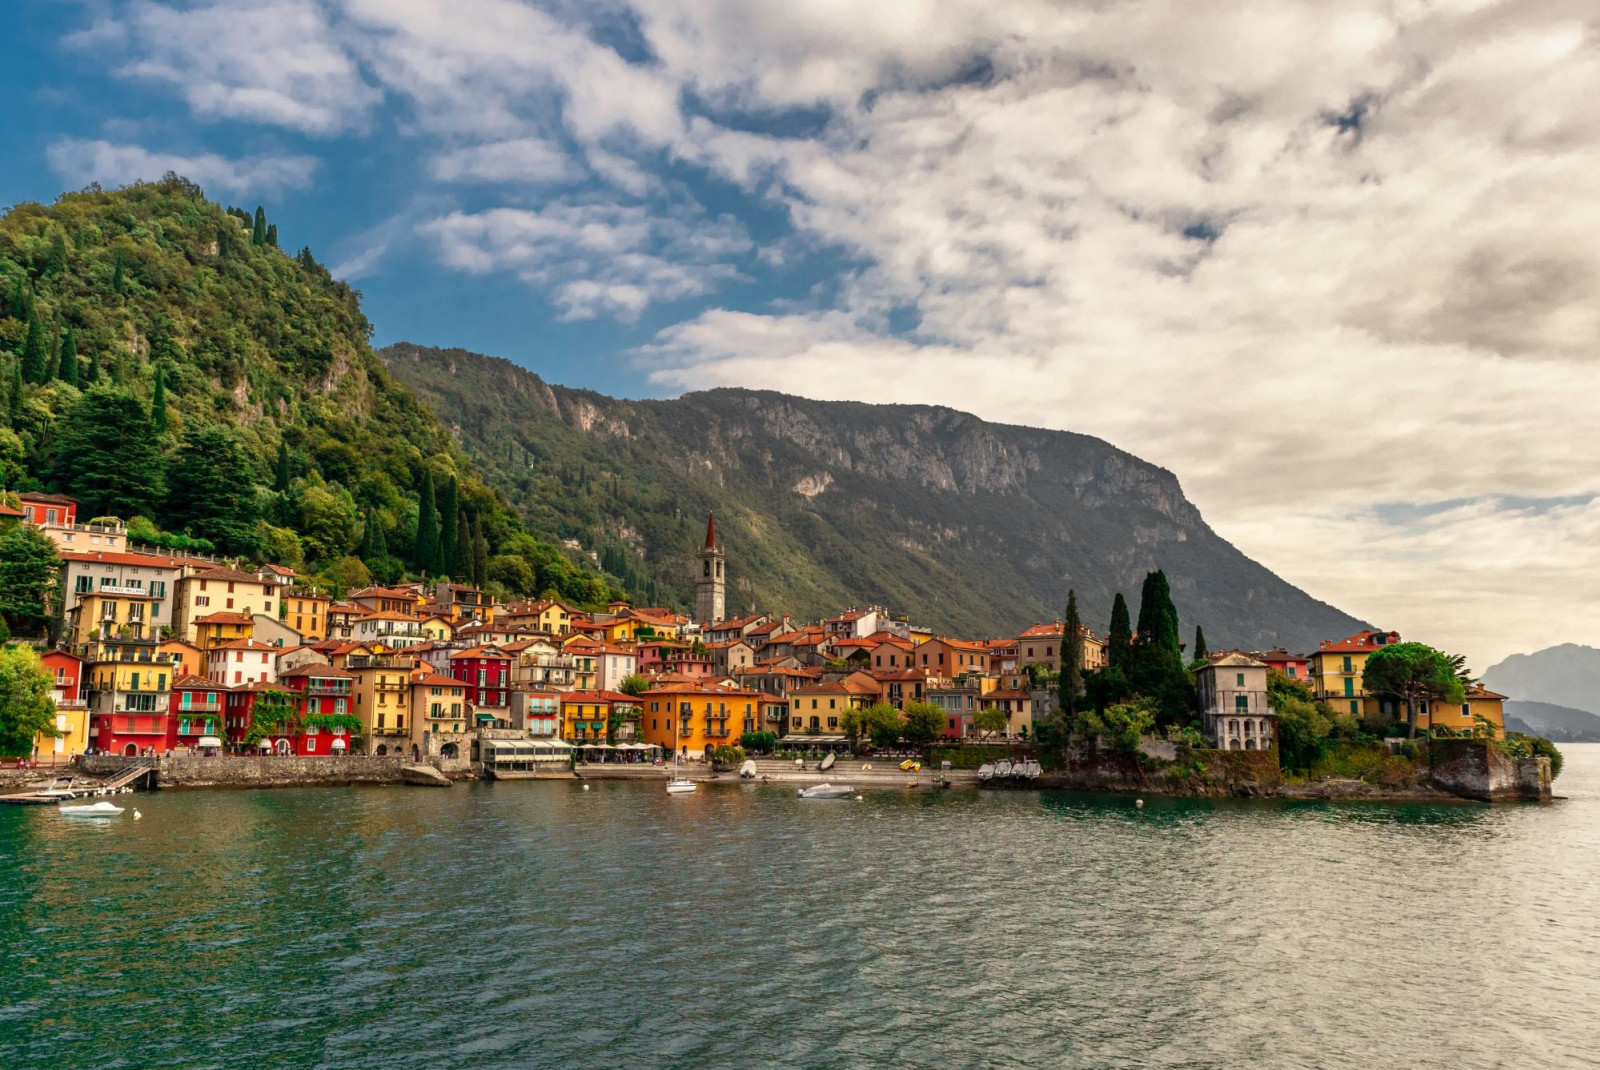 Colorful buildings next to water in Lake Como in Italy.